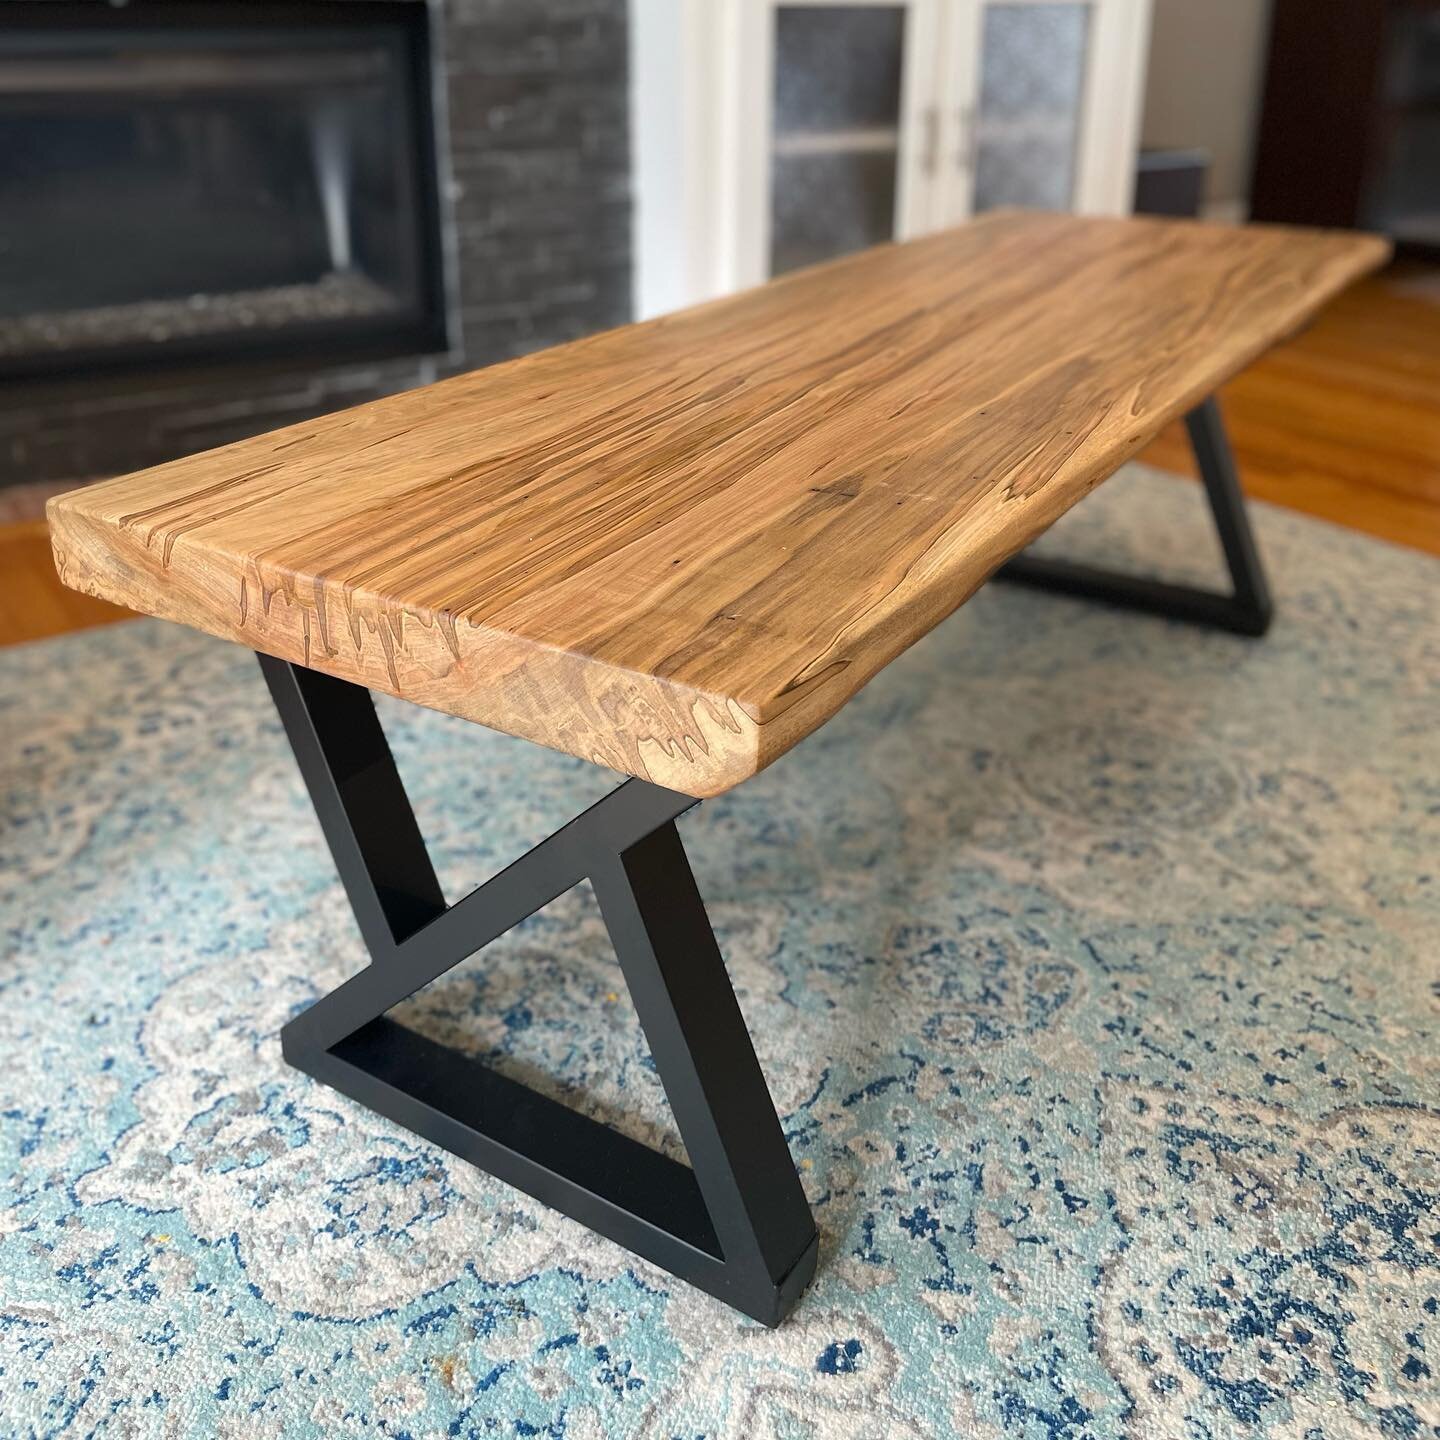 For sale! Made by Live Well Build Co. Wormy maple bench with triangular black metal legs. 18&rdquo; D x 54.25&rdquo; W x 18.5&rdquo; H Great as an entryway bench, end of your bed bench or whatever else you have in mind! Finished in a satin hard wax b